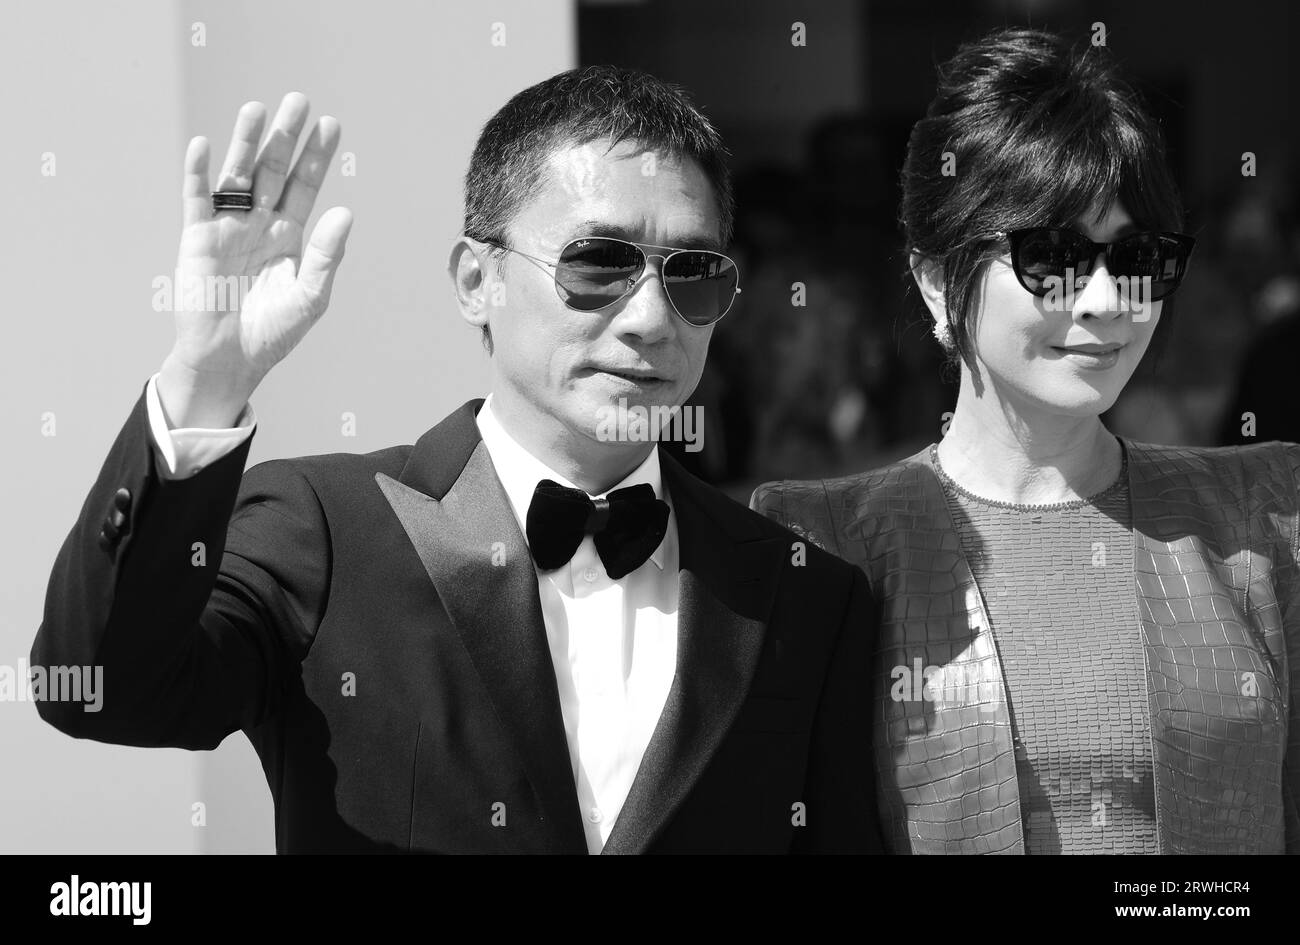 VENICE, ITALY - SEPTEMBER 02: Tony Leung Chiu-Wai and Carina Lau Kar-ling attends a red carpet for the Golden Lion For Lifetime Achievement Stock Photo